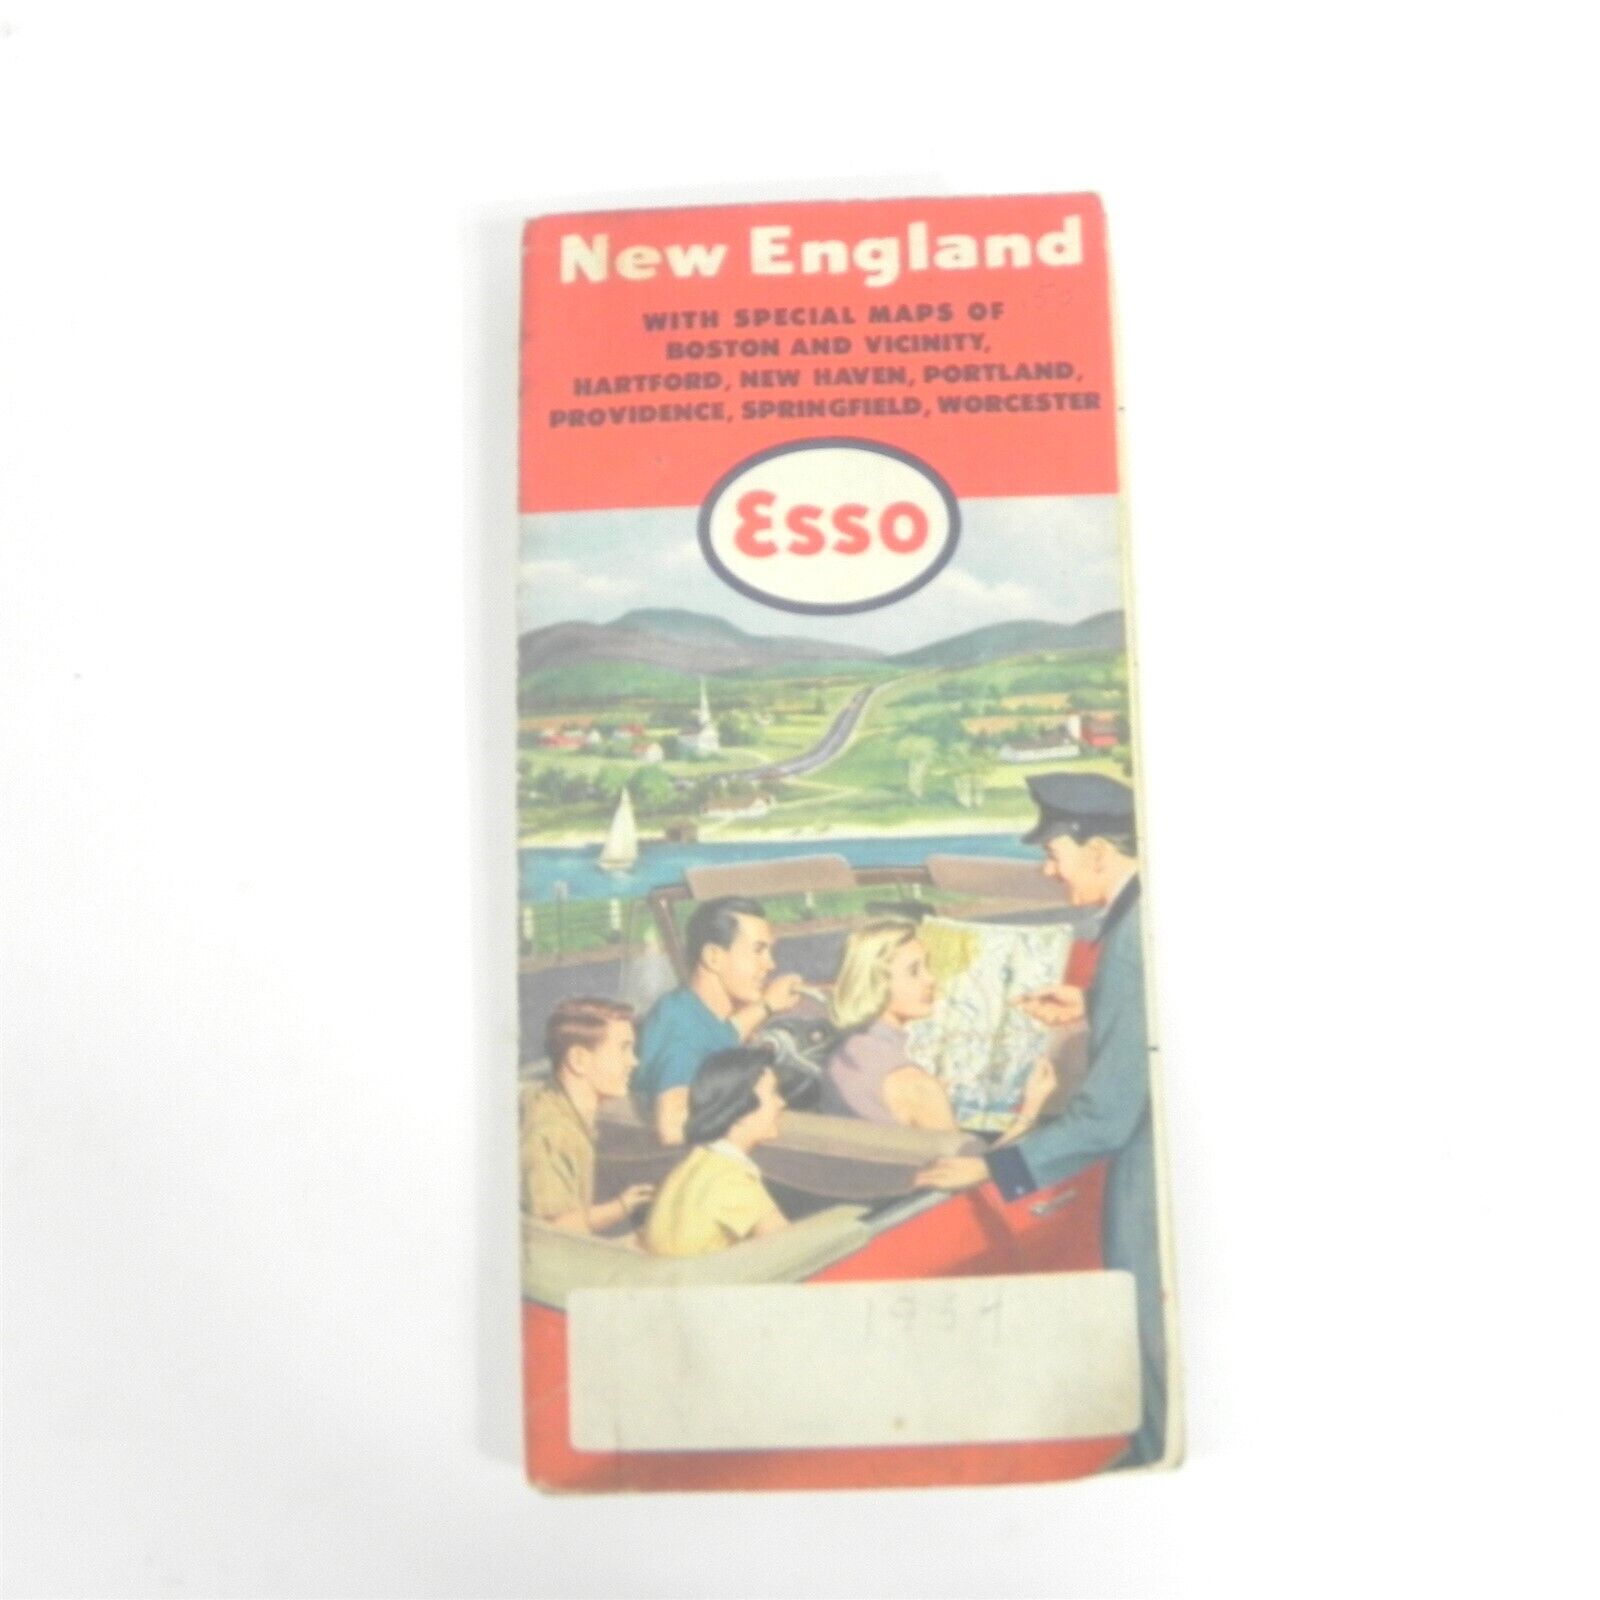 VINTAGE 1954 ESSO OIL COMPANY MAP OF NEW ENGLAND TOURING GUIDE GAS OIL PROMO